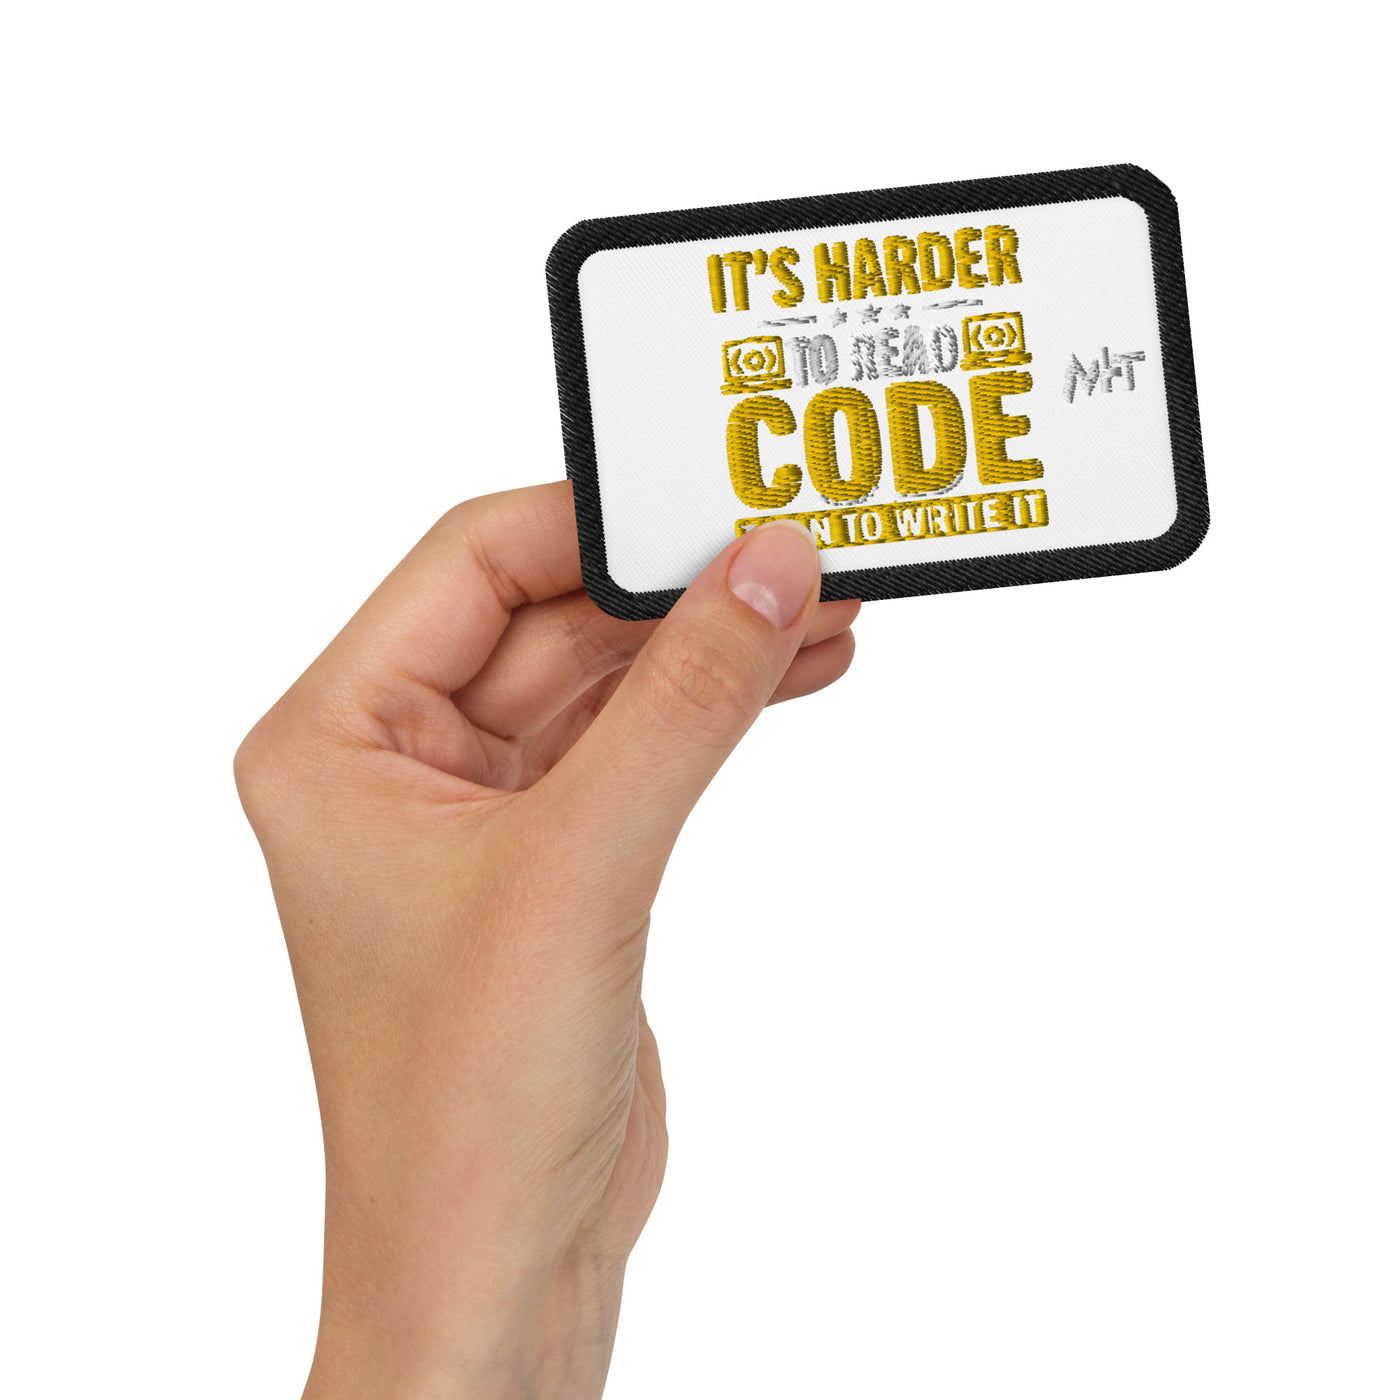 It's harder to read Code then to read it - Embroidered patches